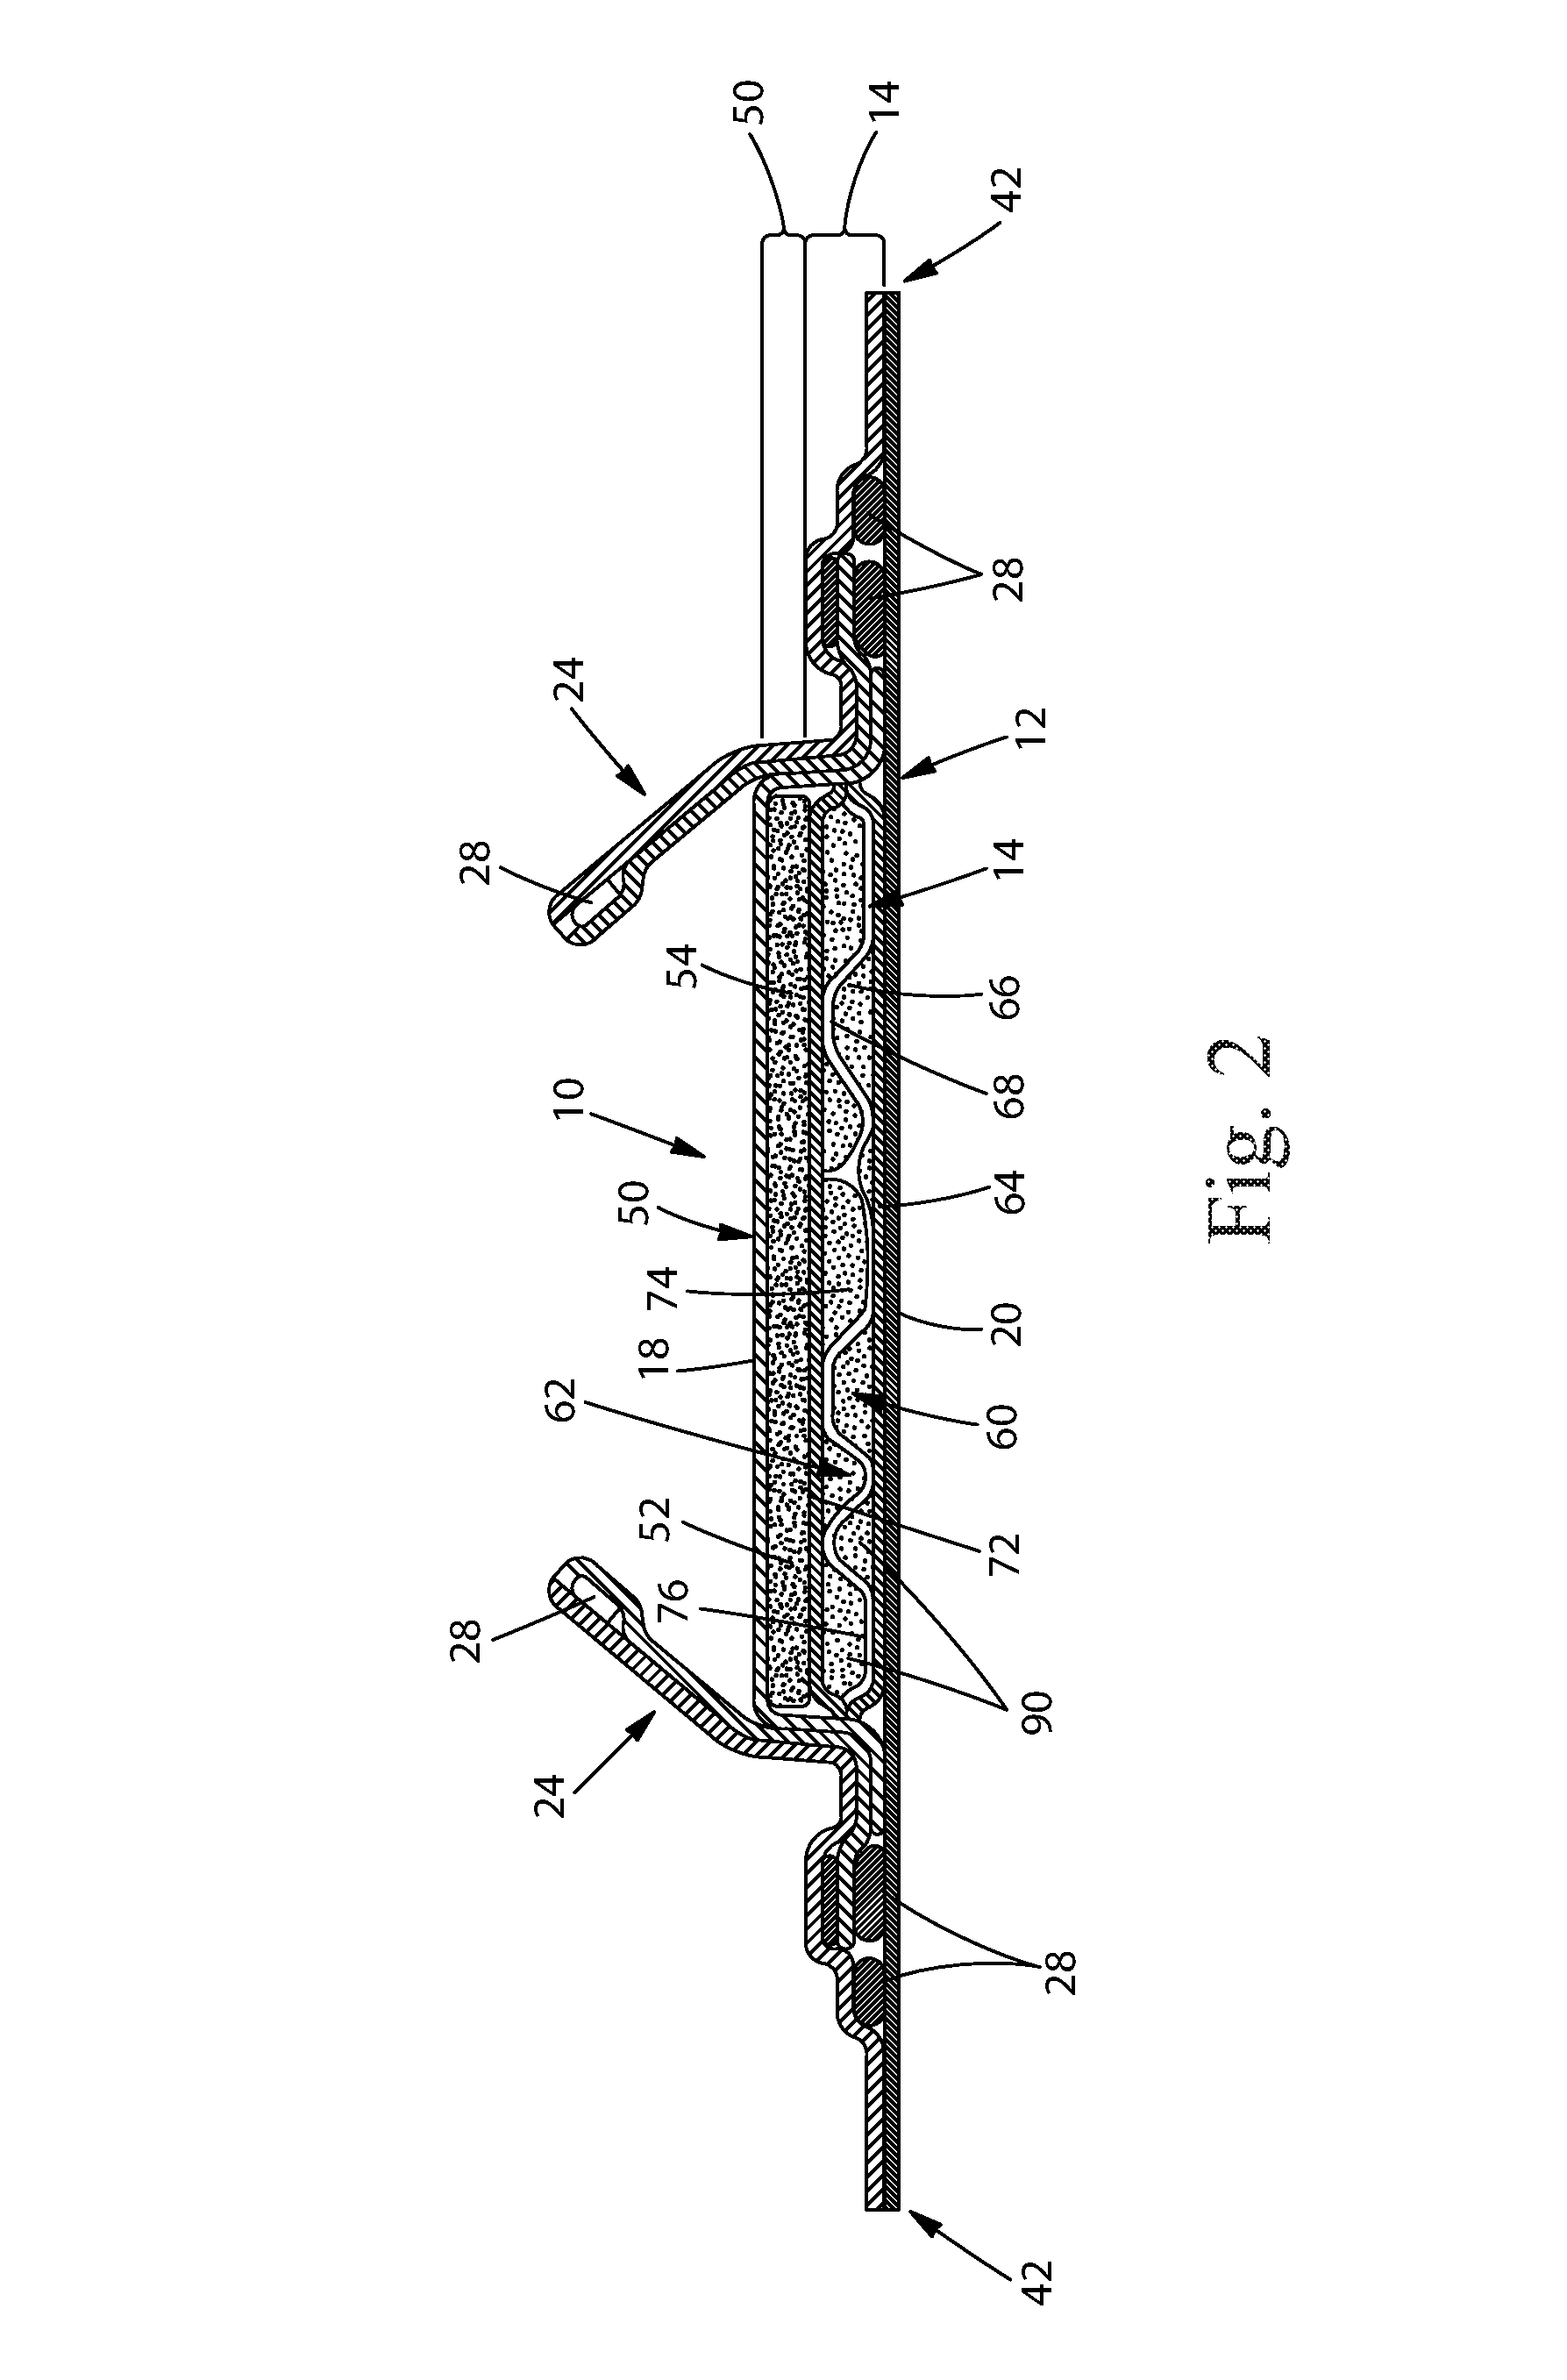 Absorbent articles with improved cores